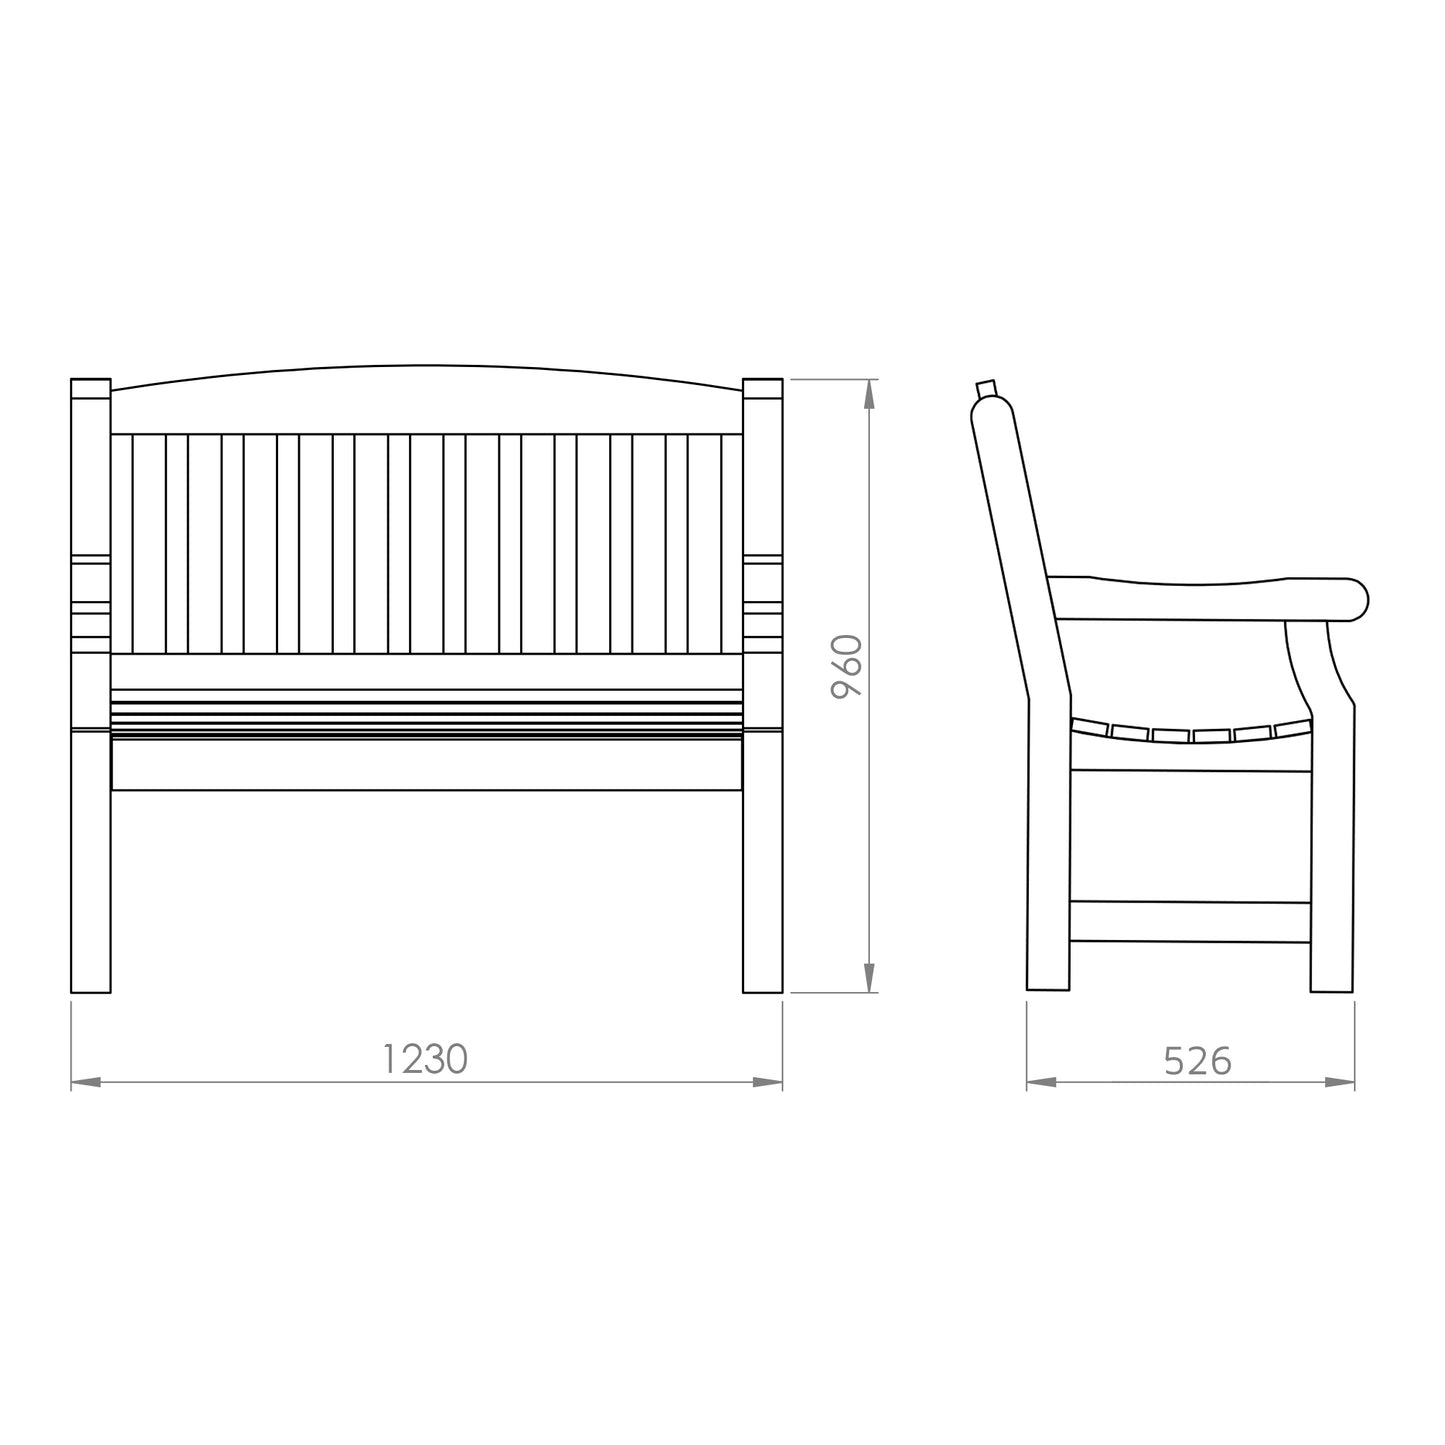 A specification image showing the size of a timber bench